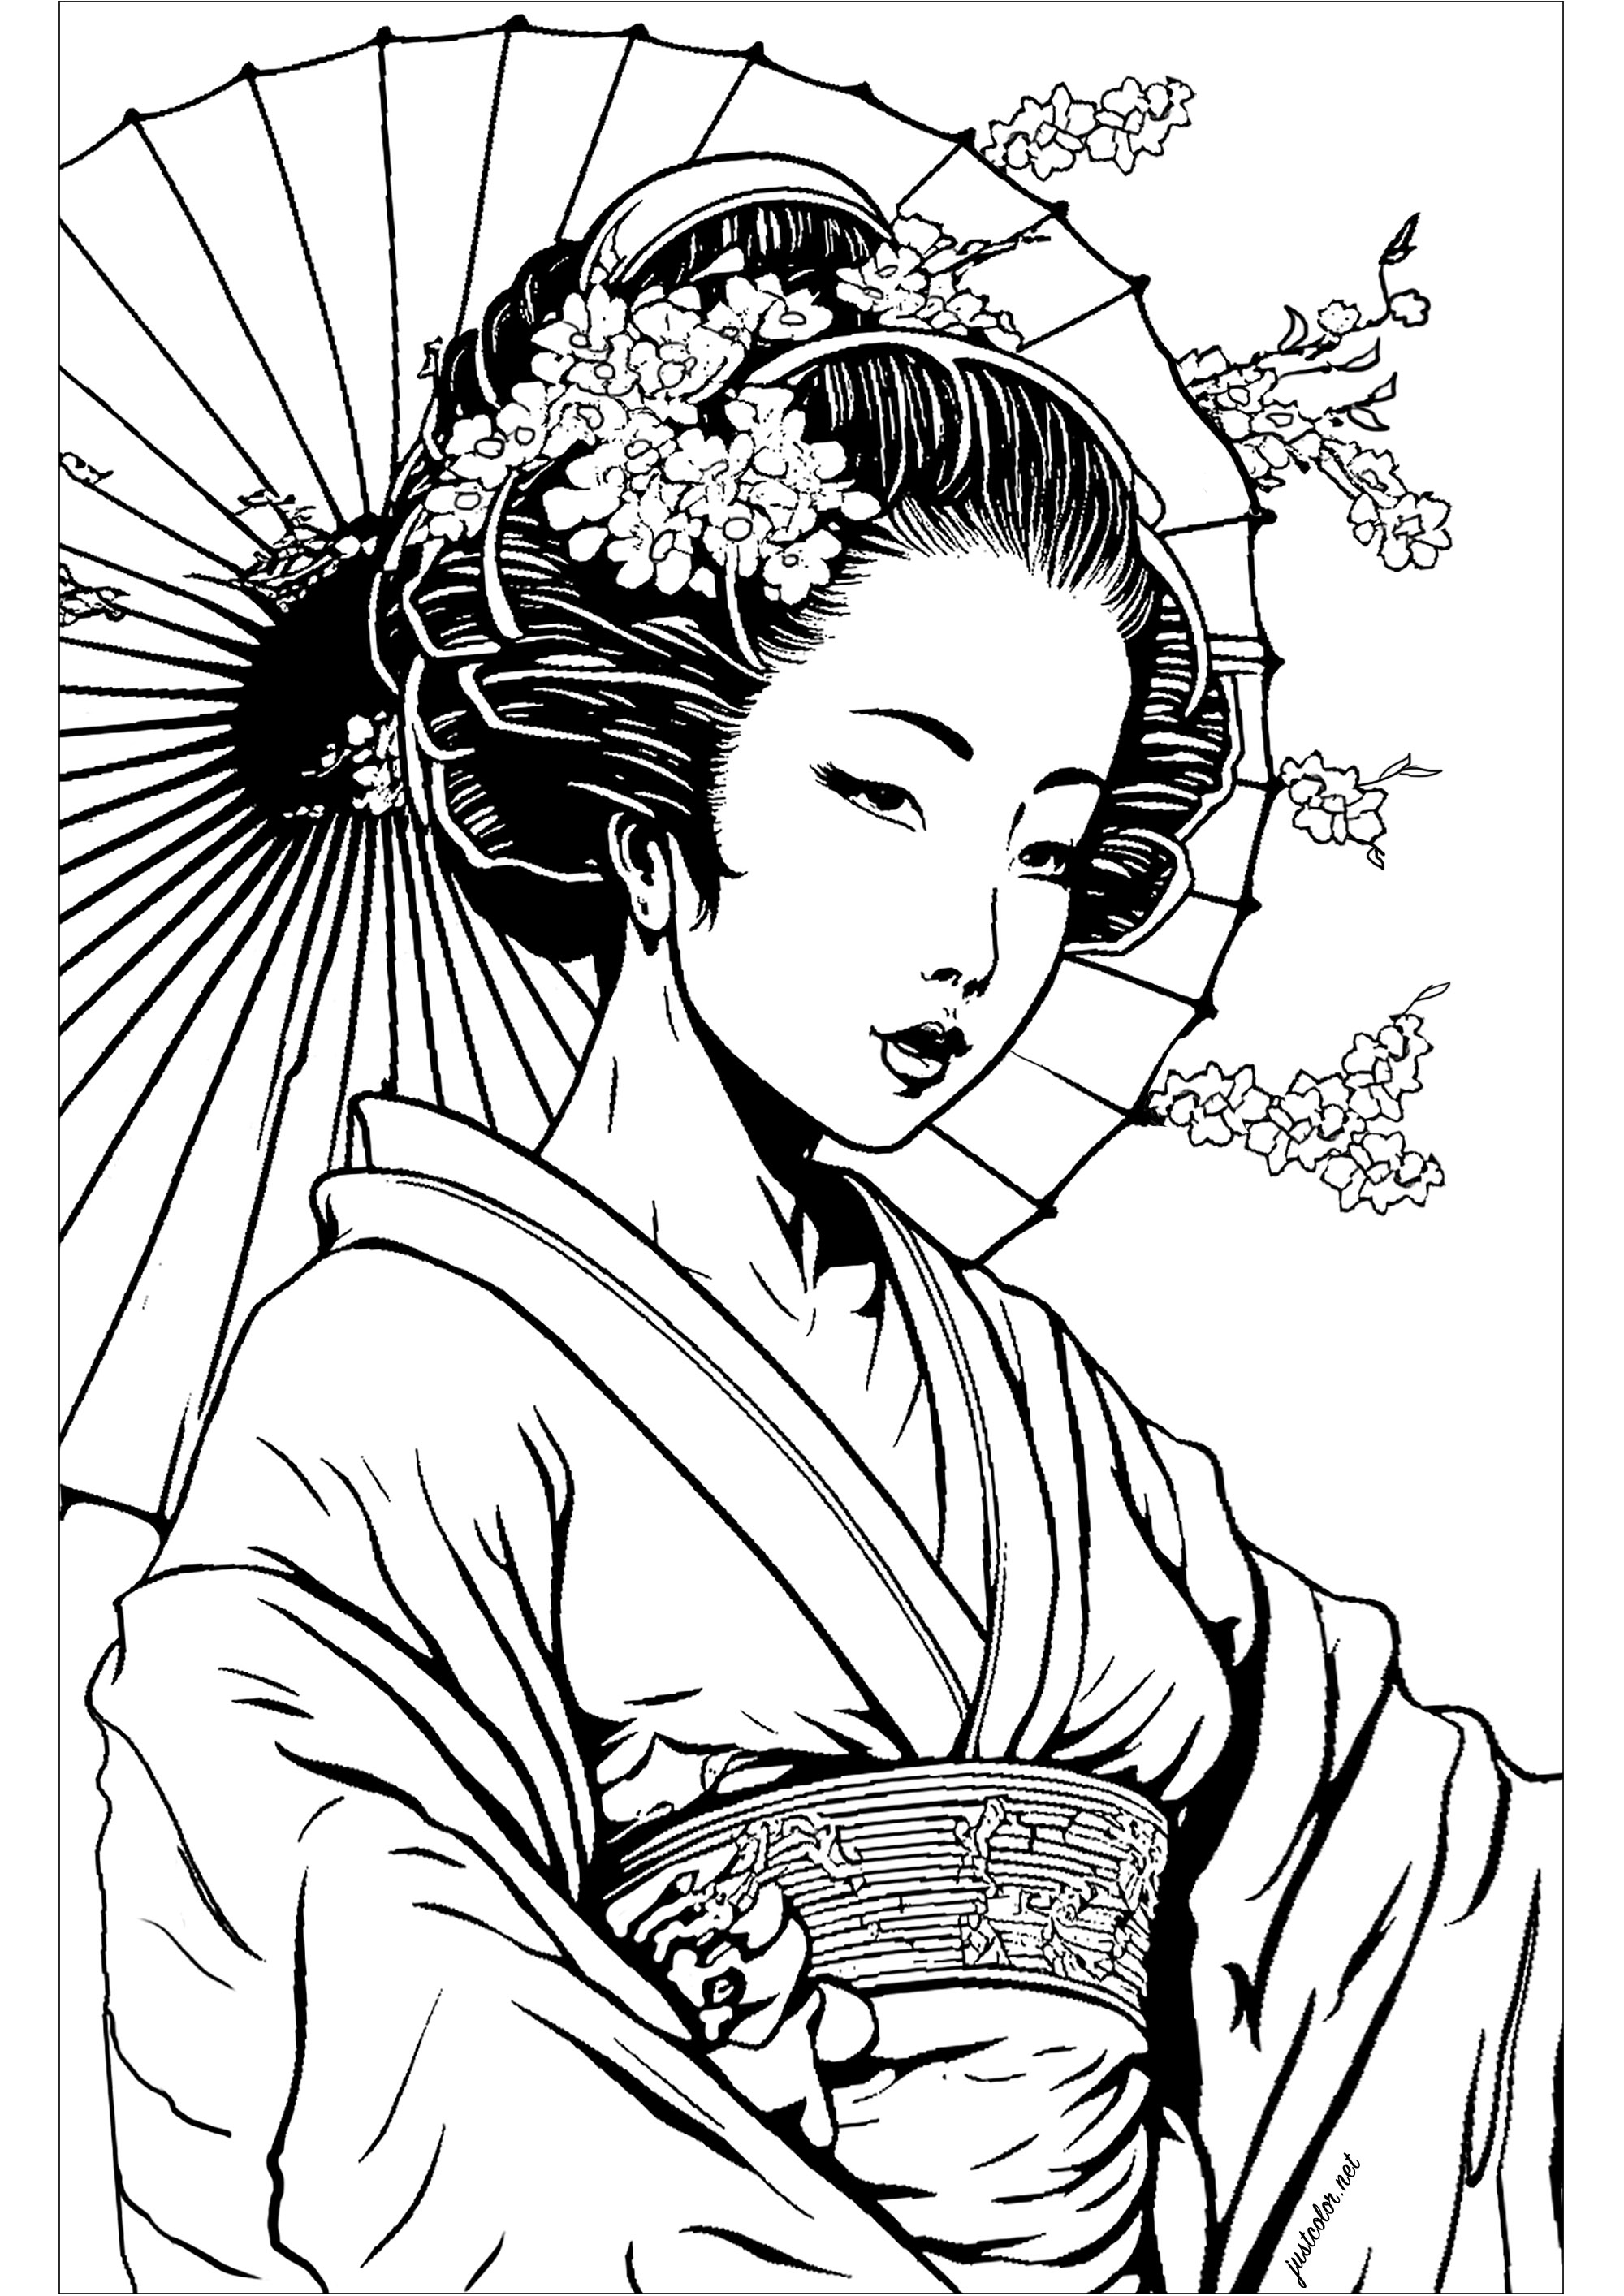 Beautiful Geisha to color. The Geisha is represented in a classical pose